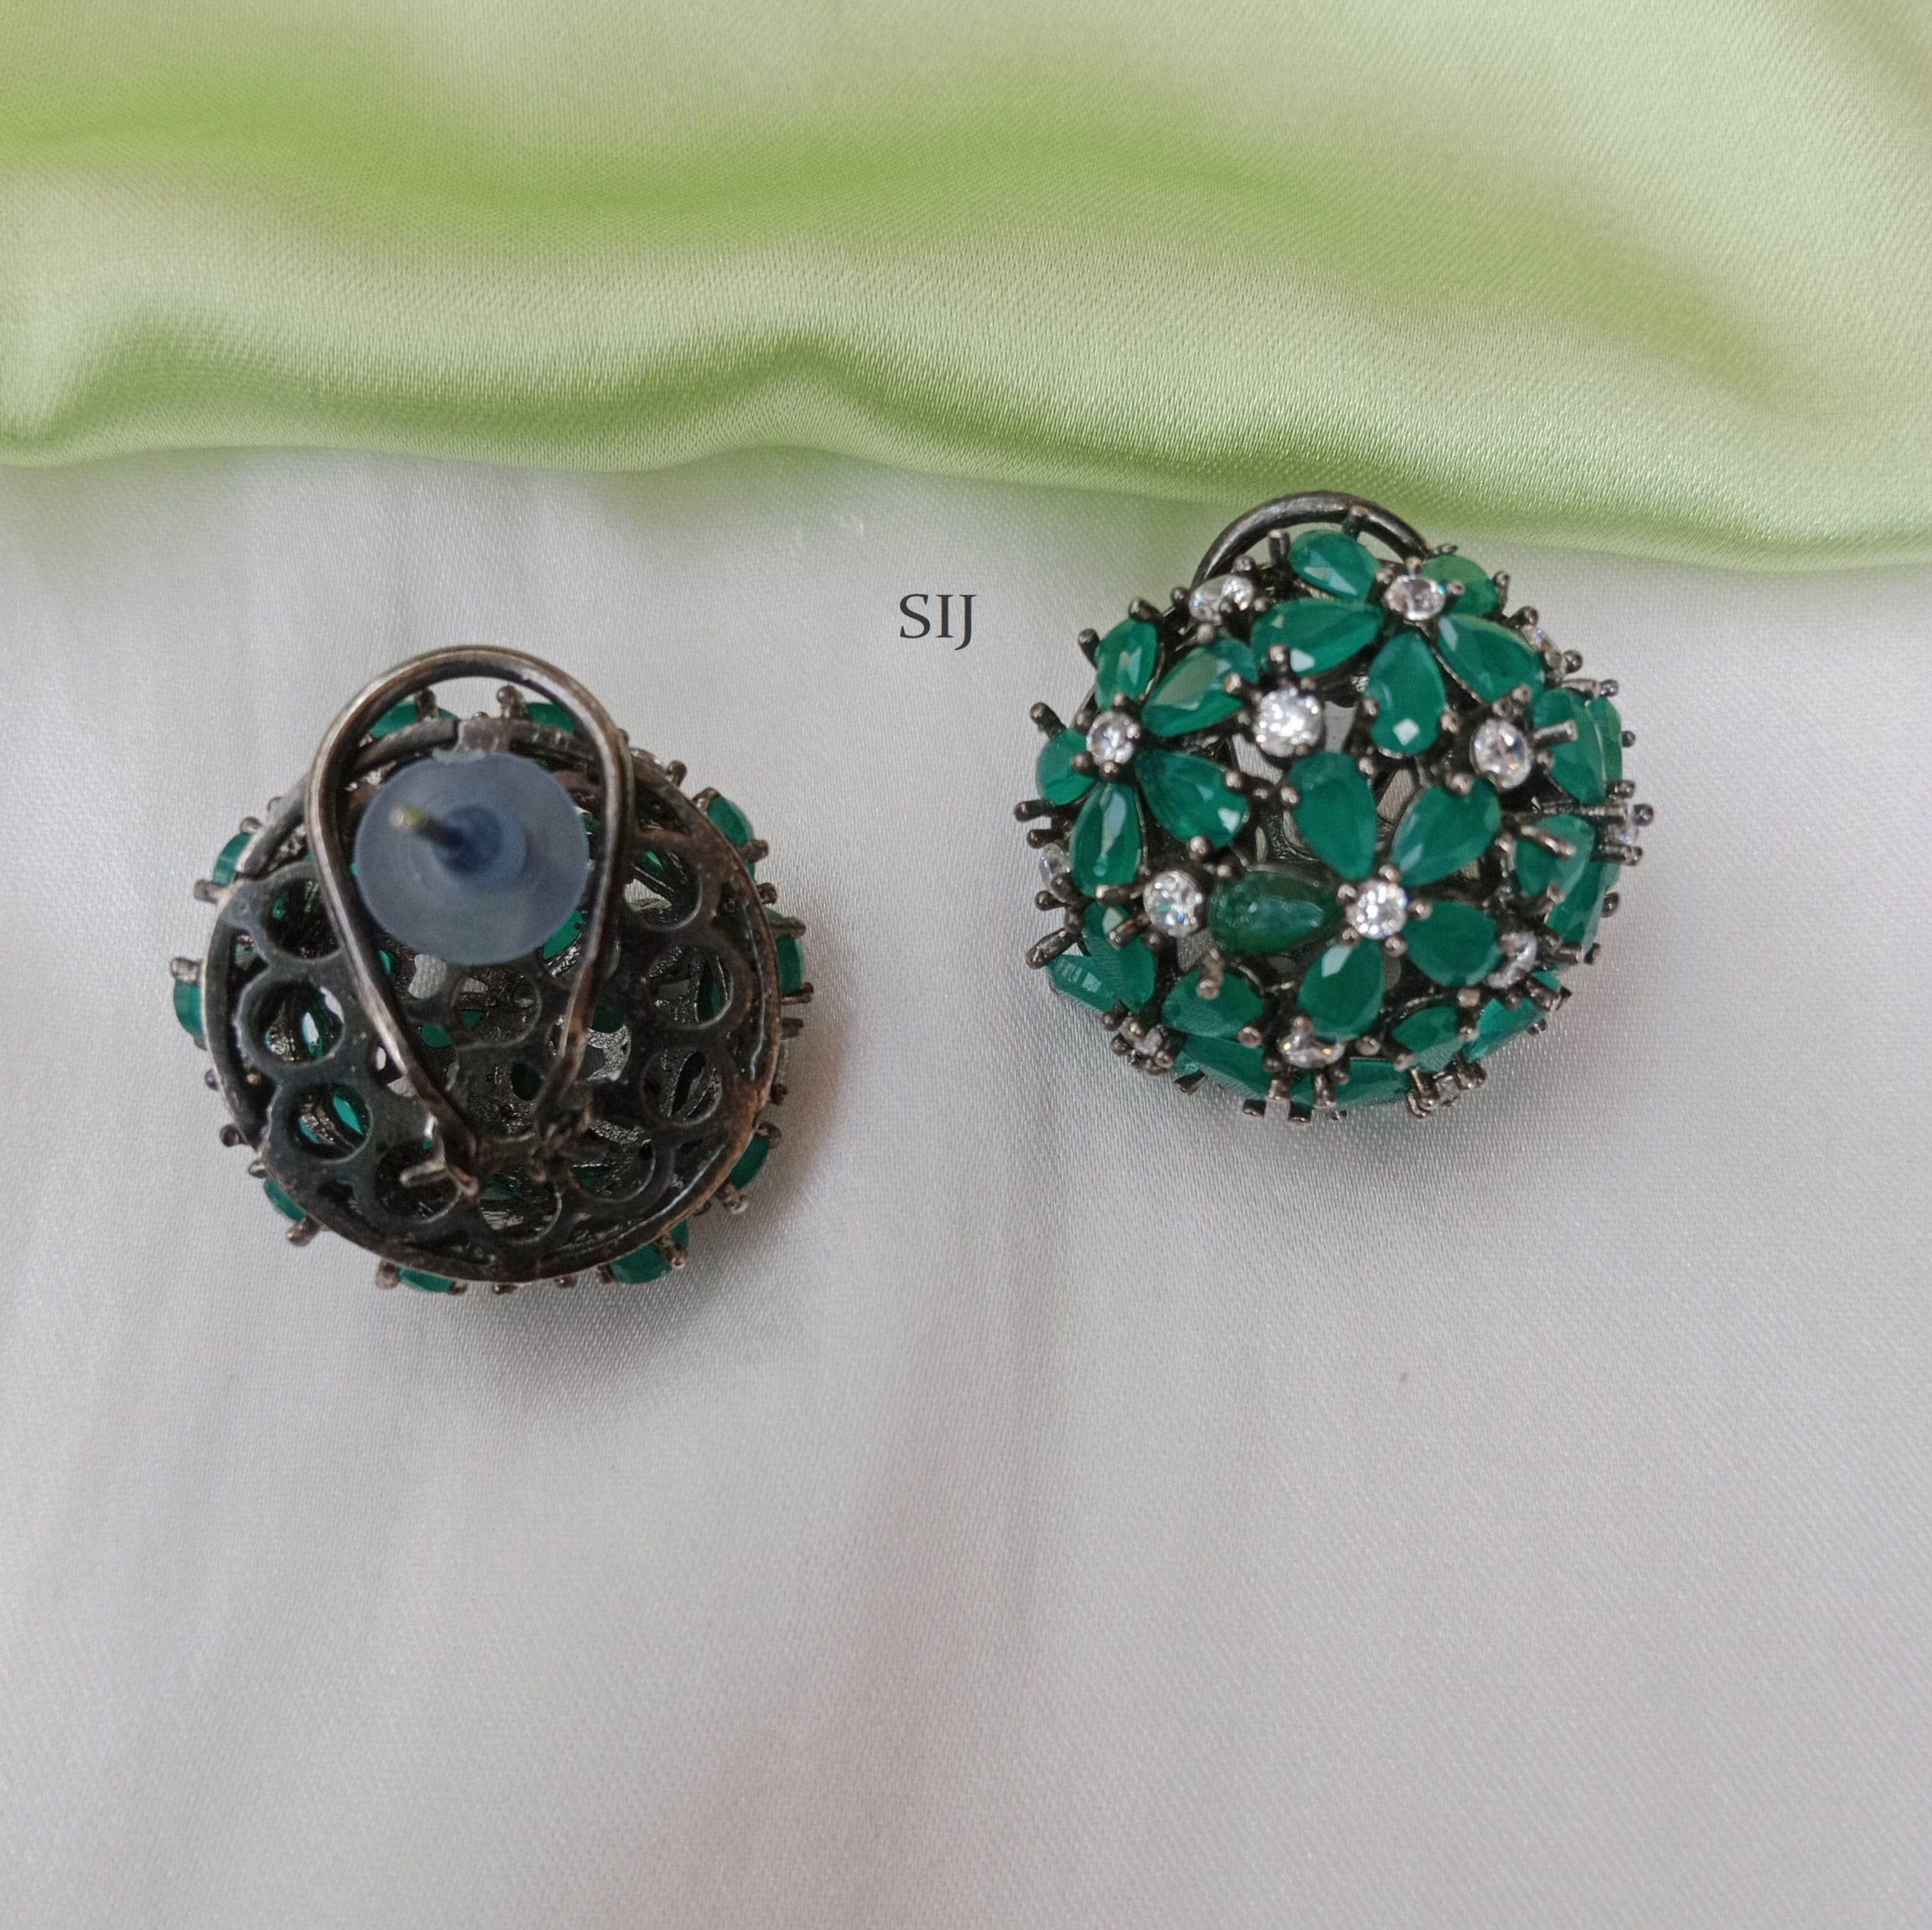 Round Emerald and AD Stones Stud Earrings - South India Jewels